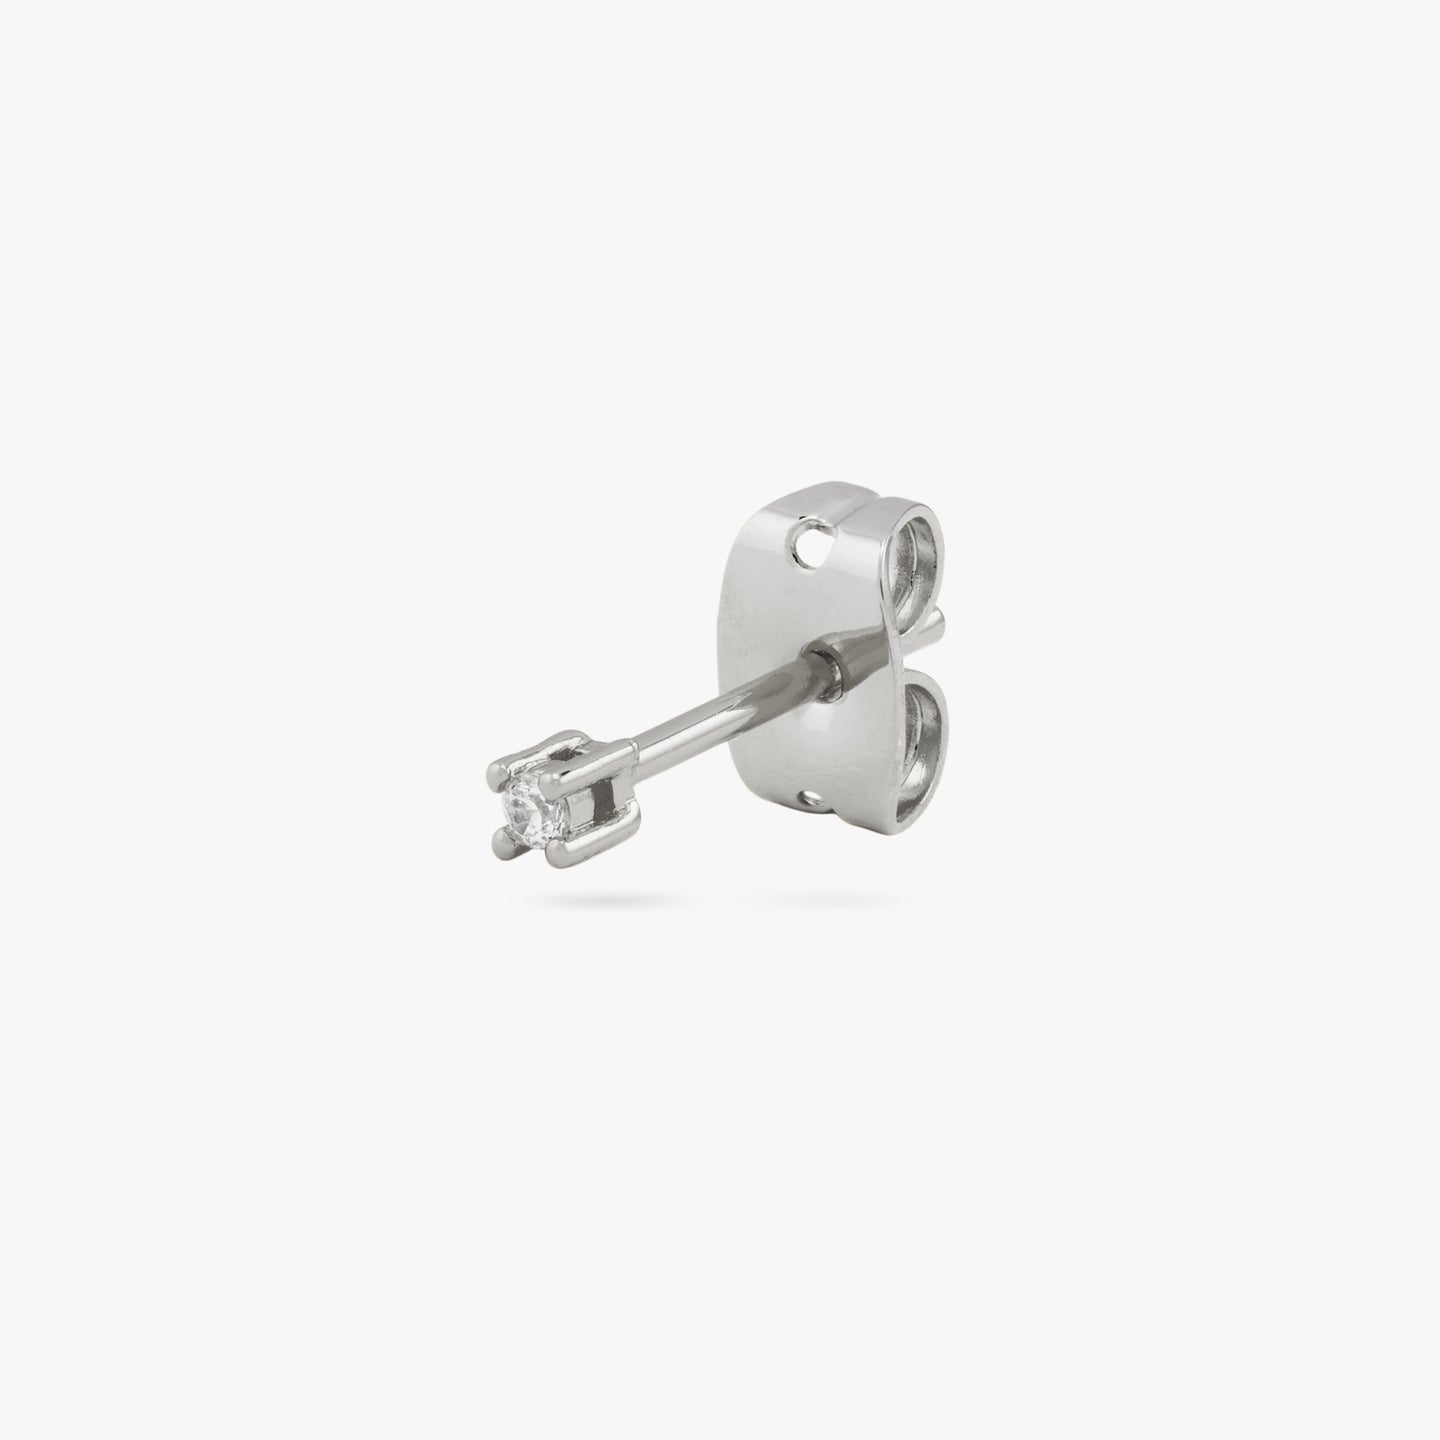 A silver micro stud with a clear cz gem color:null|silver/clear